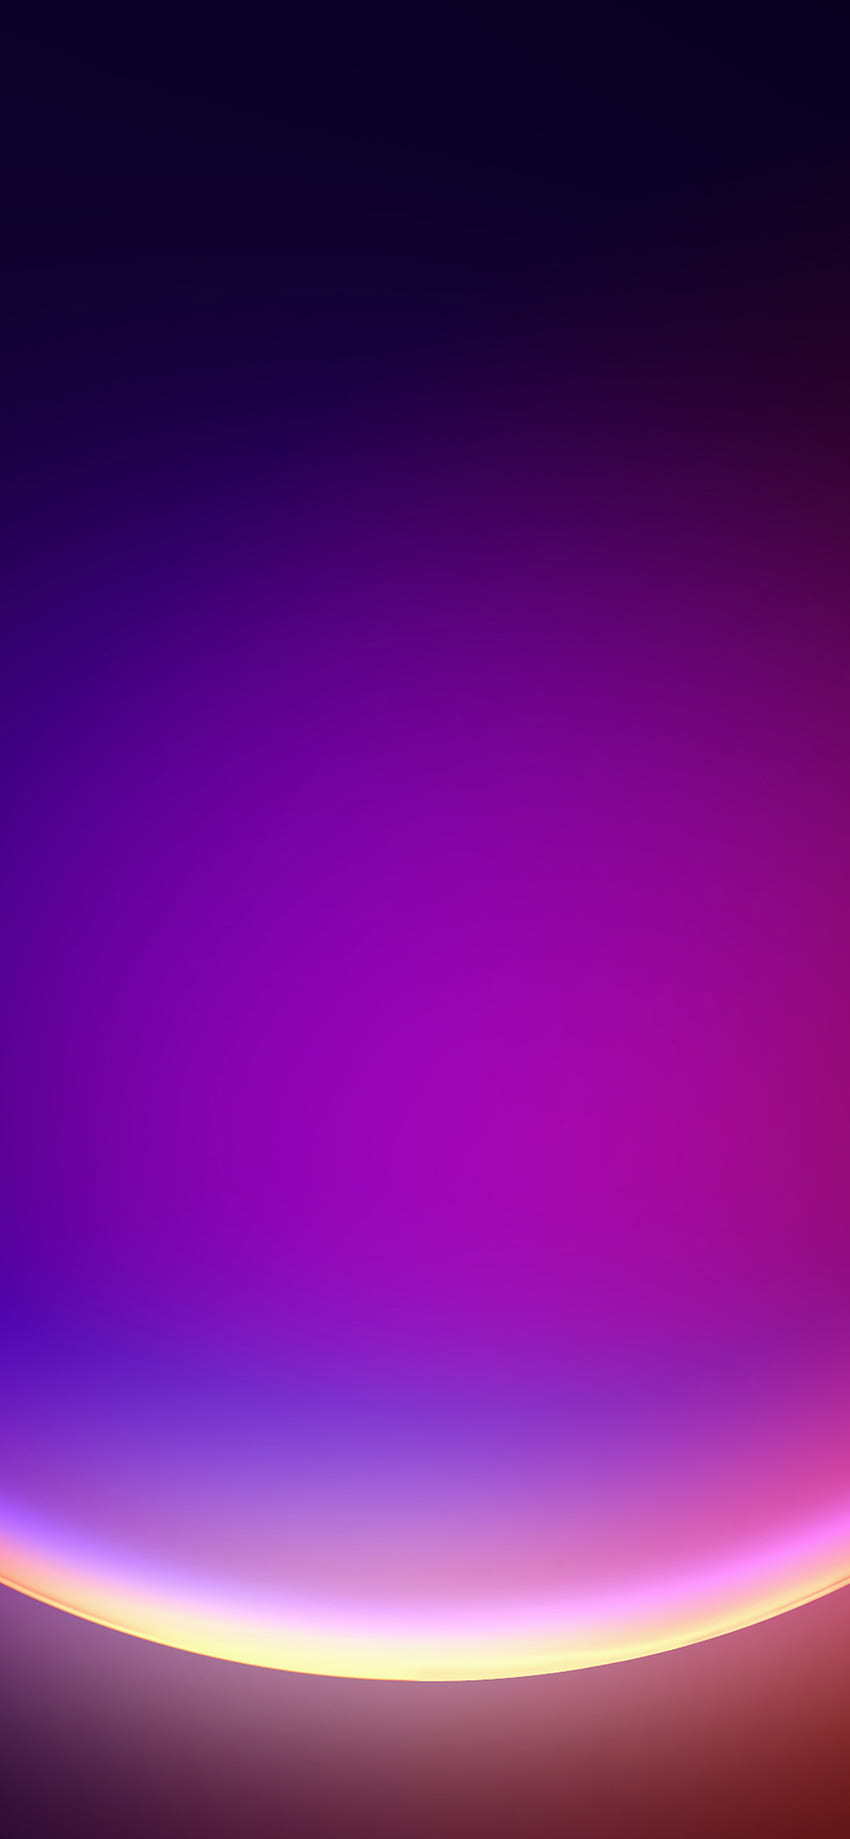 Windows 11 For iPhone or Android Phone, Windows 11 Purple HD phone wallpaper